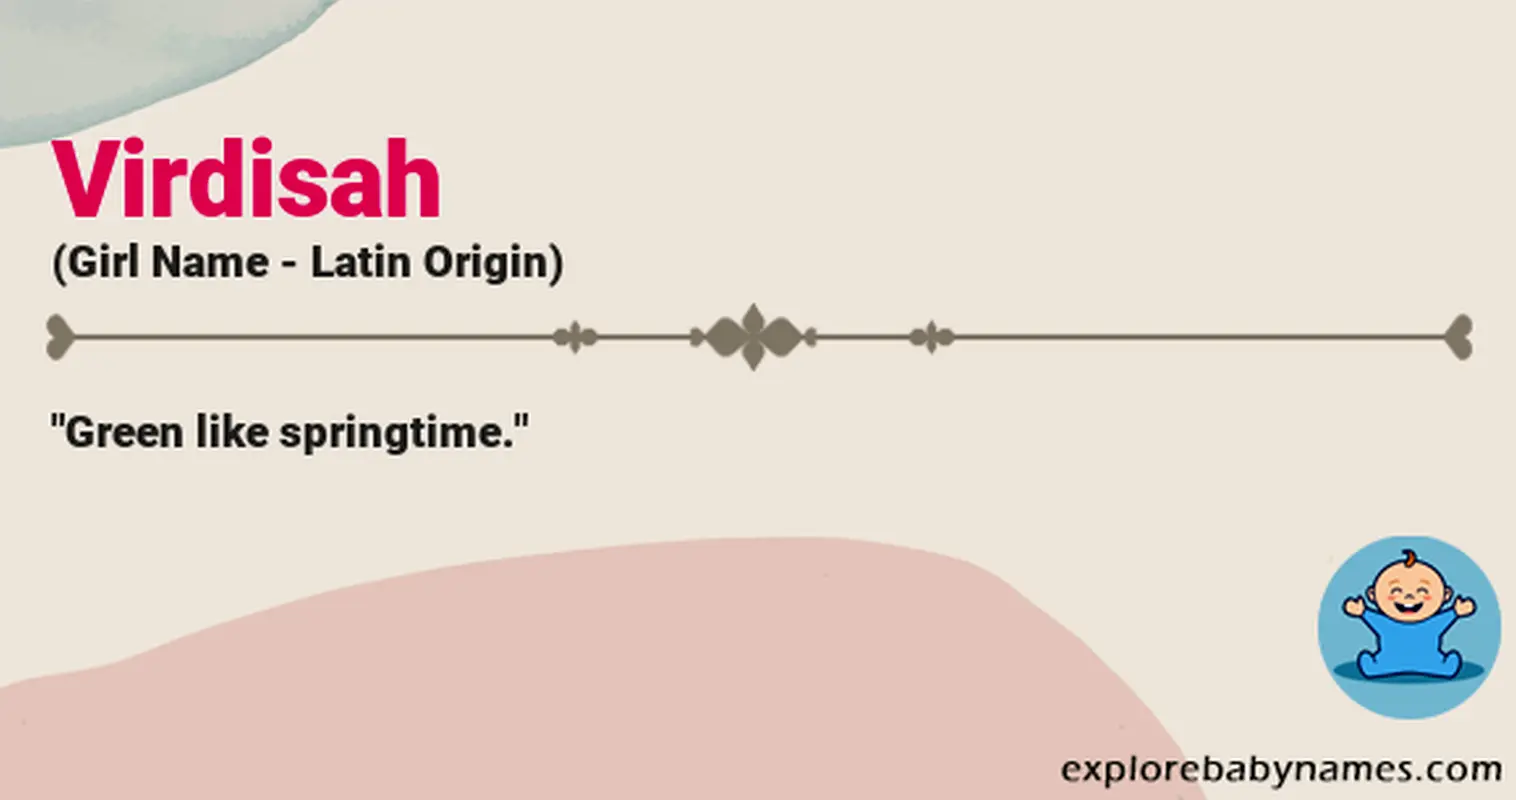 Meaning of Virdisah